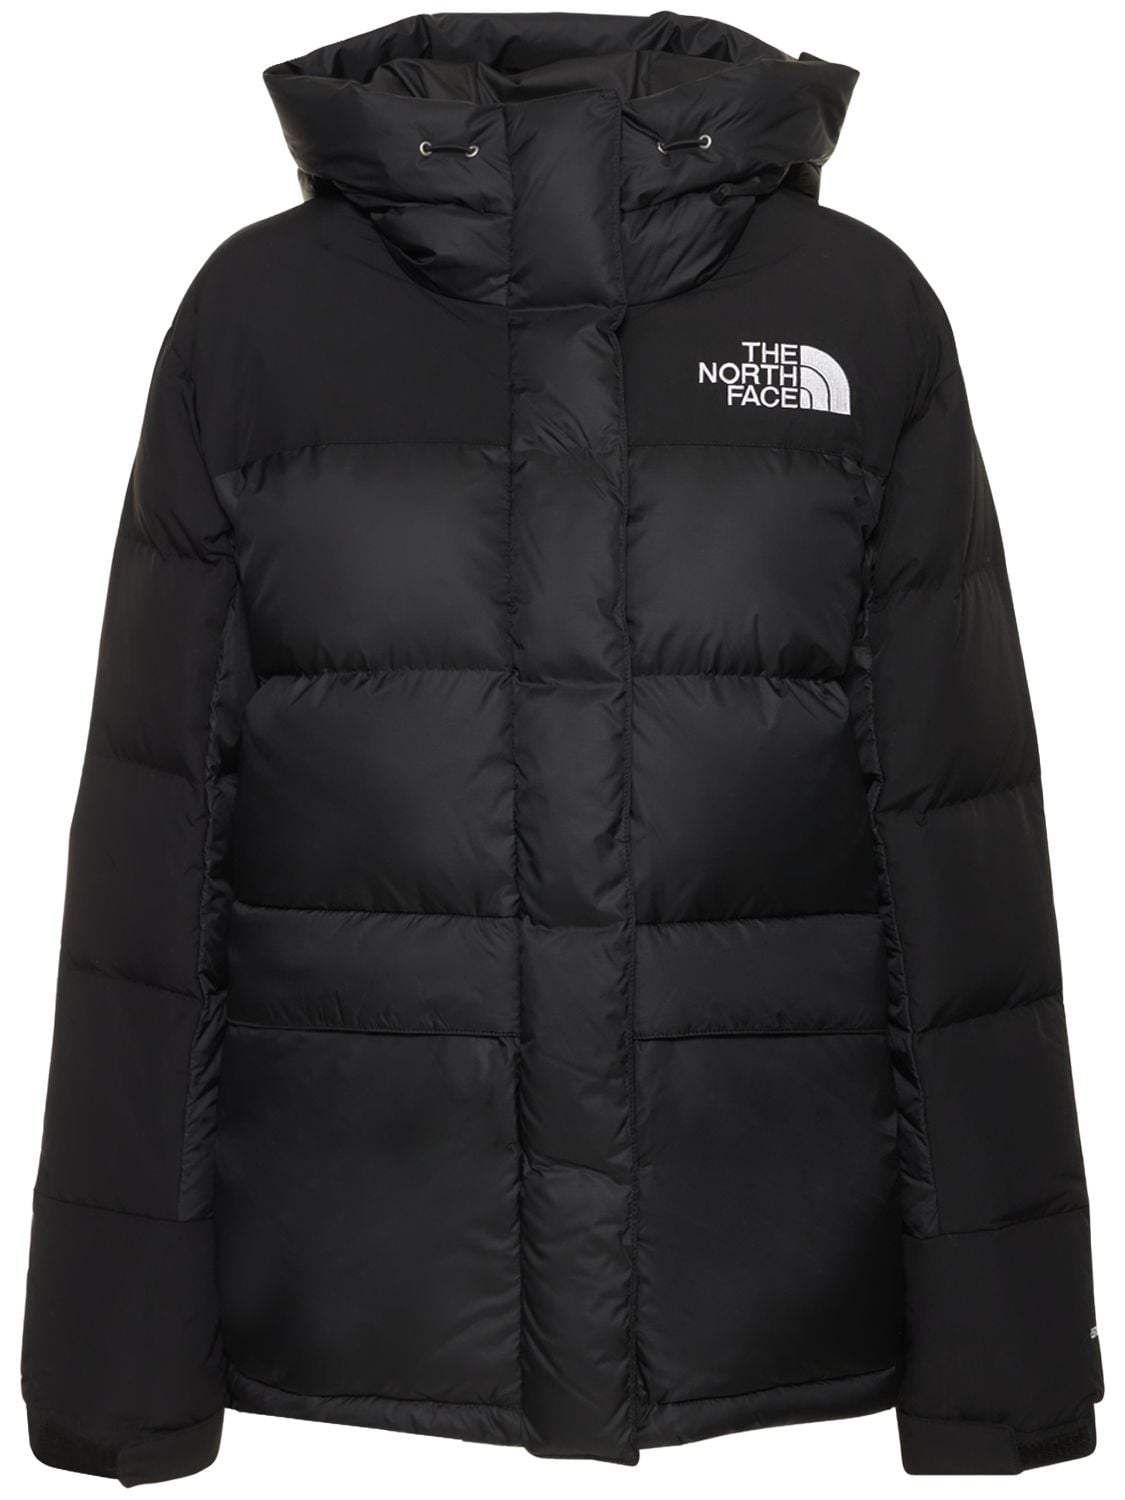 The North Face Belleview Stretch Down Parka for Women